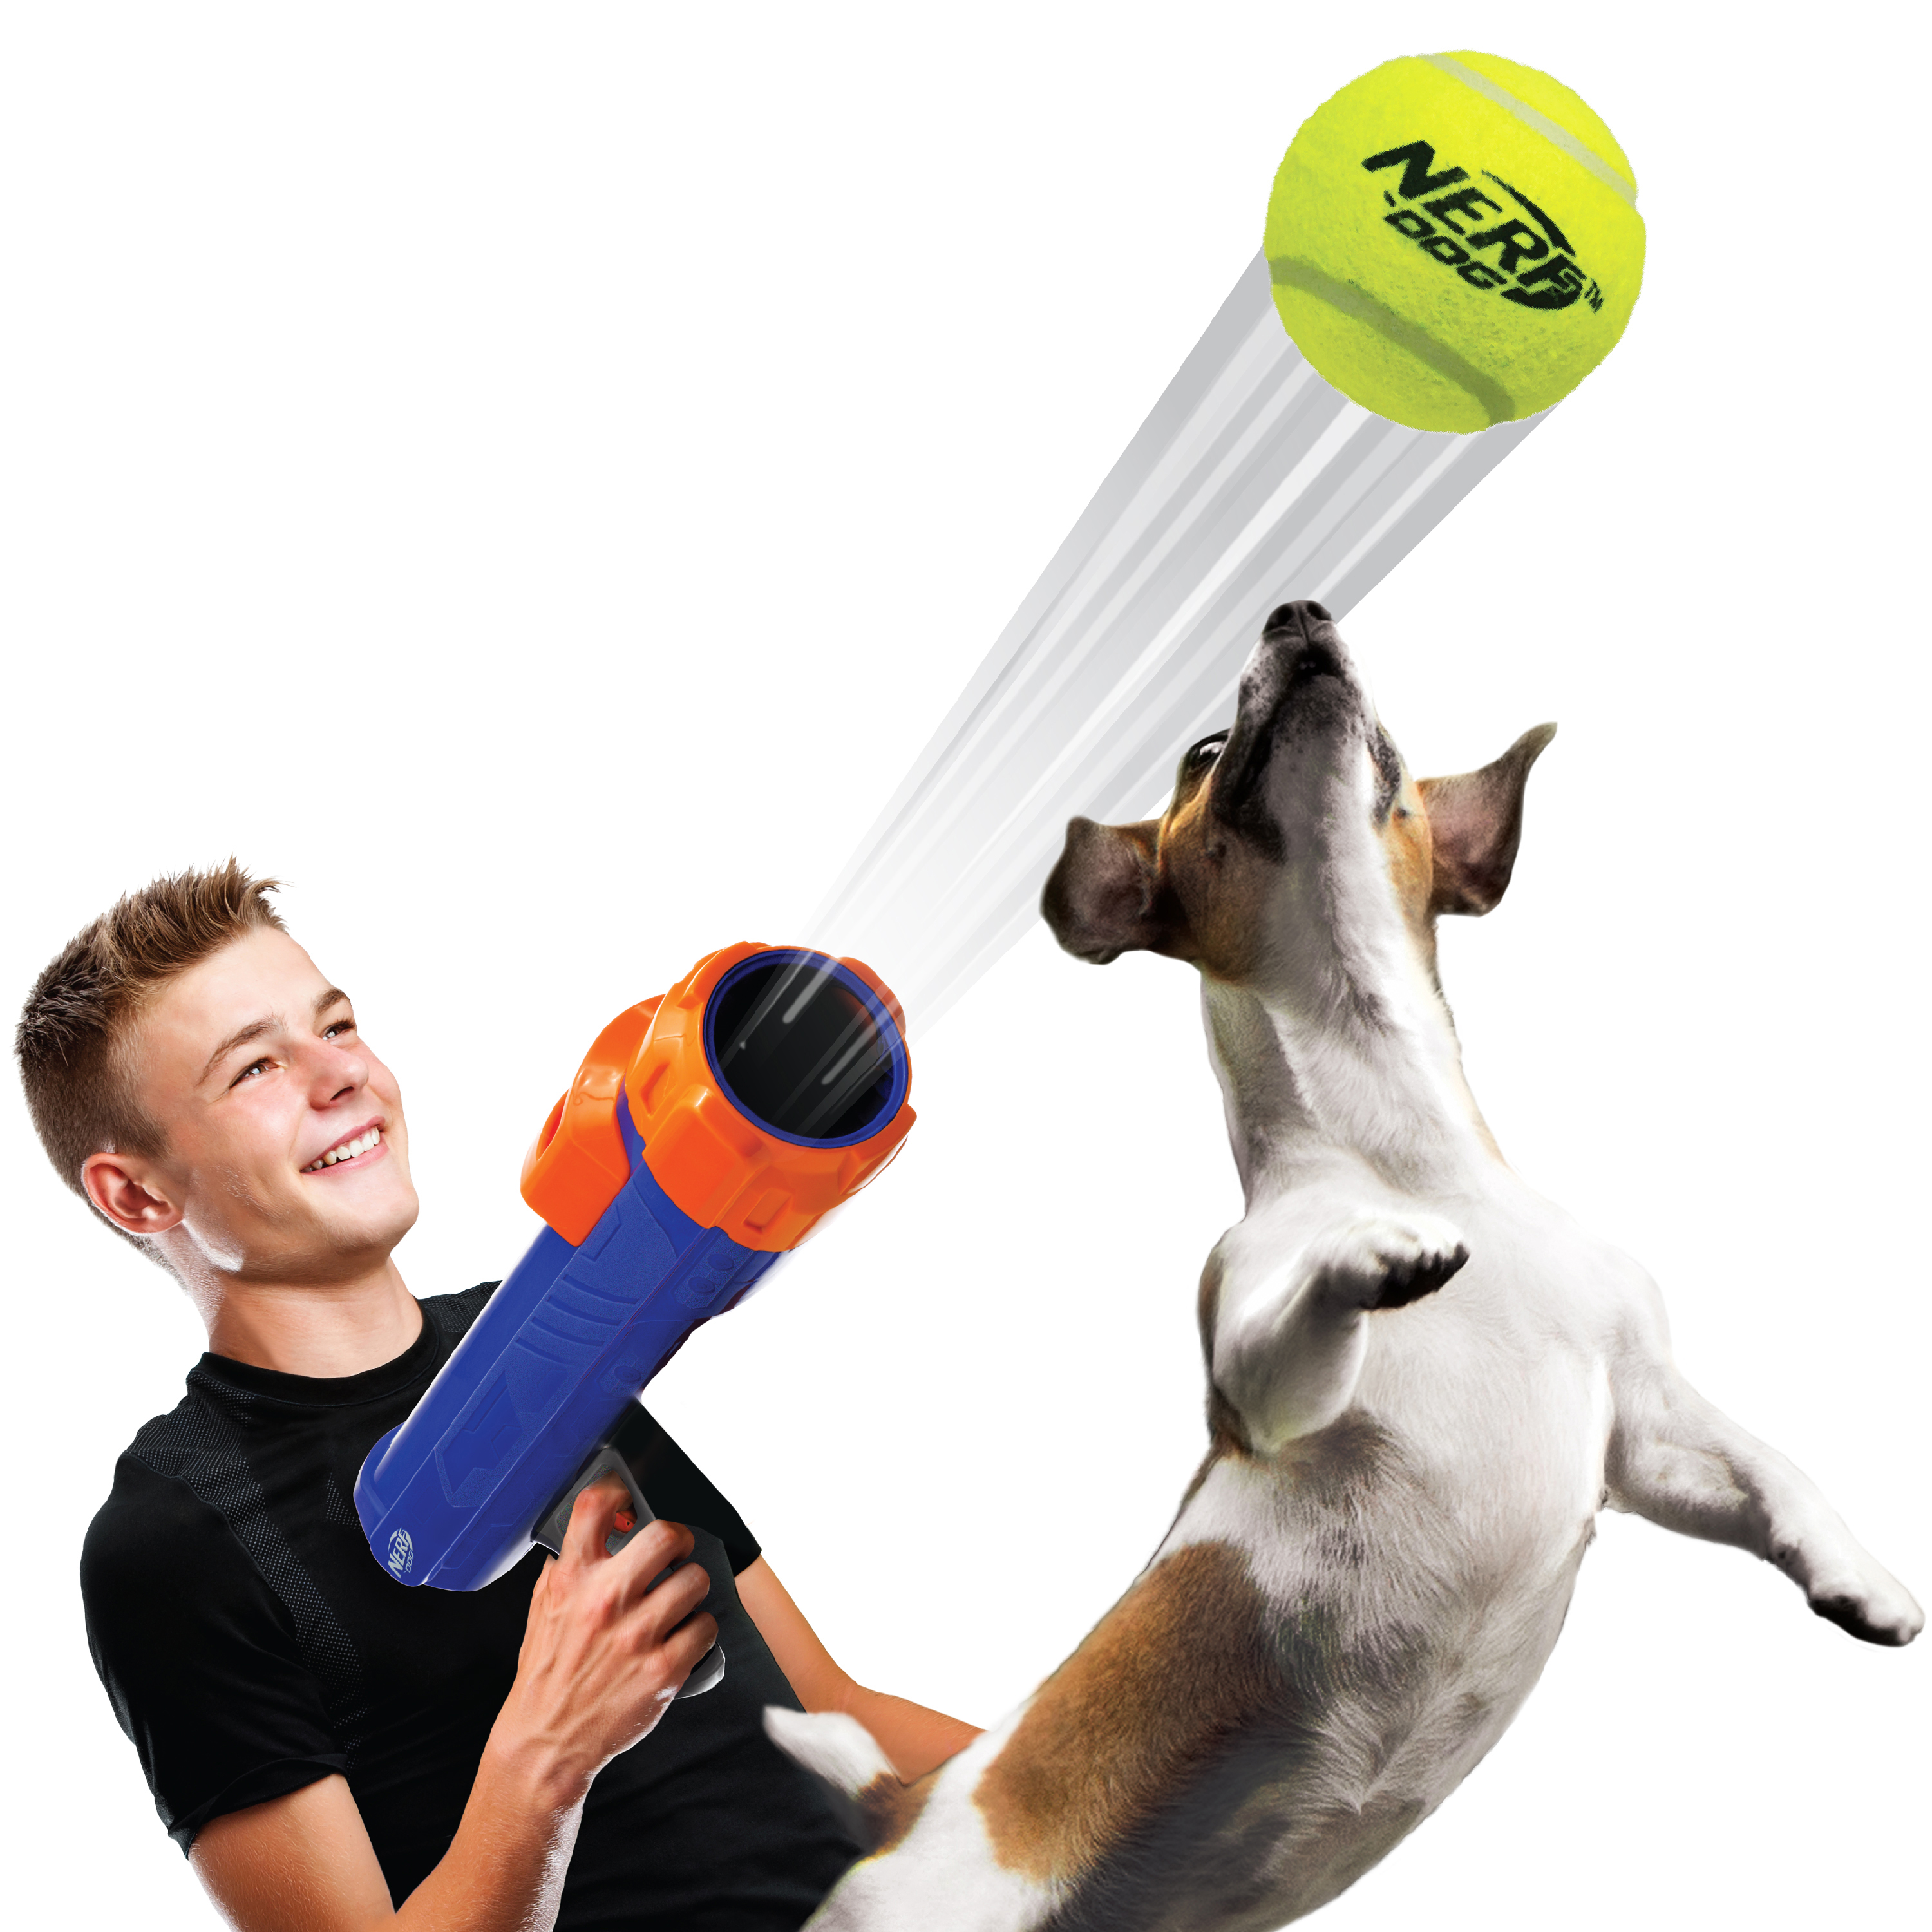 Nerf Dog 16” Tennis Ball Blaster Dog Toy with 4 Balls - image 5 of 8